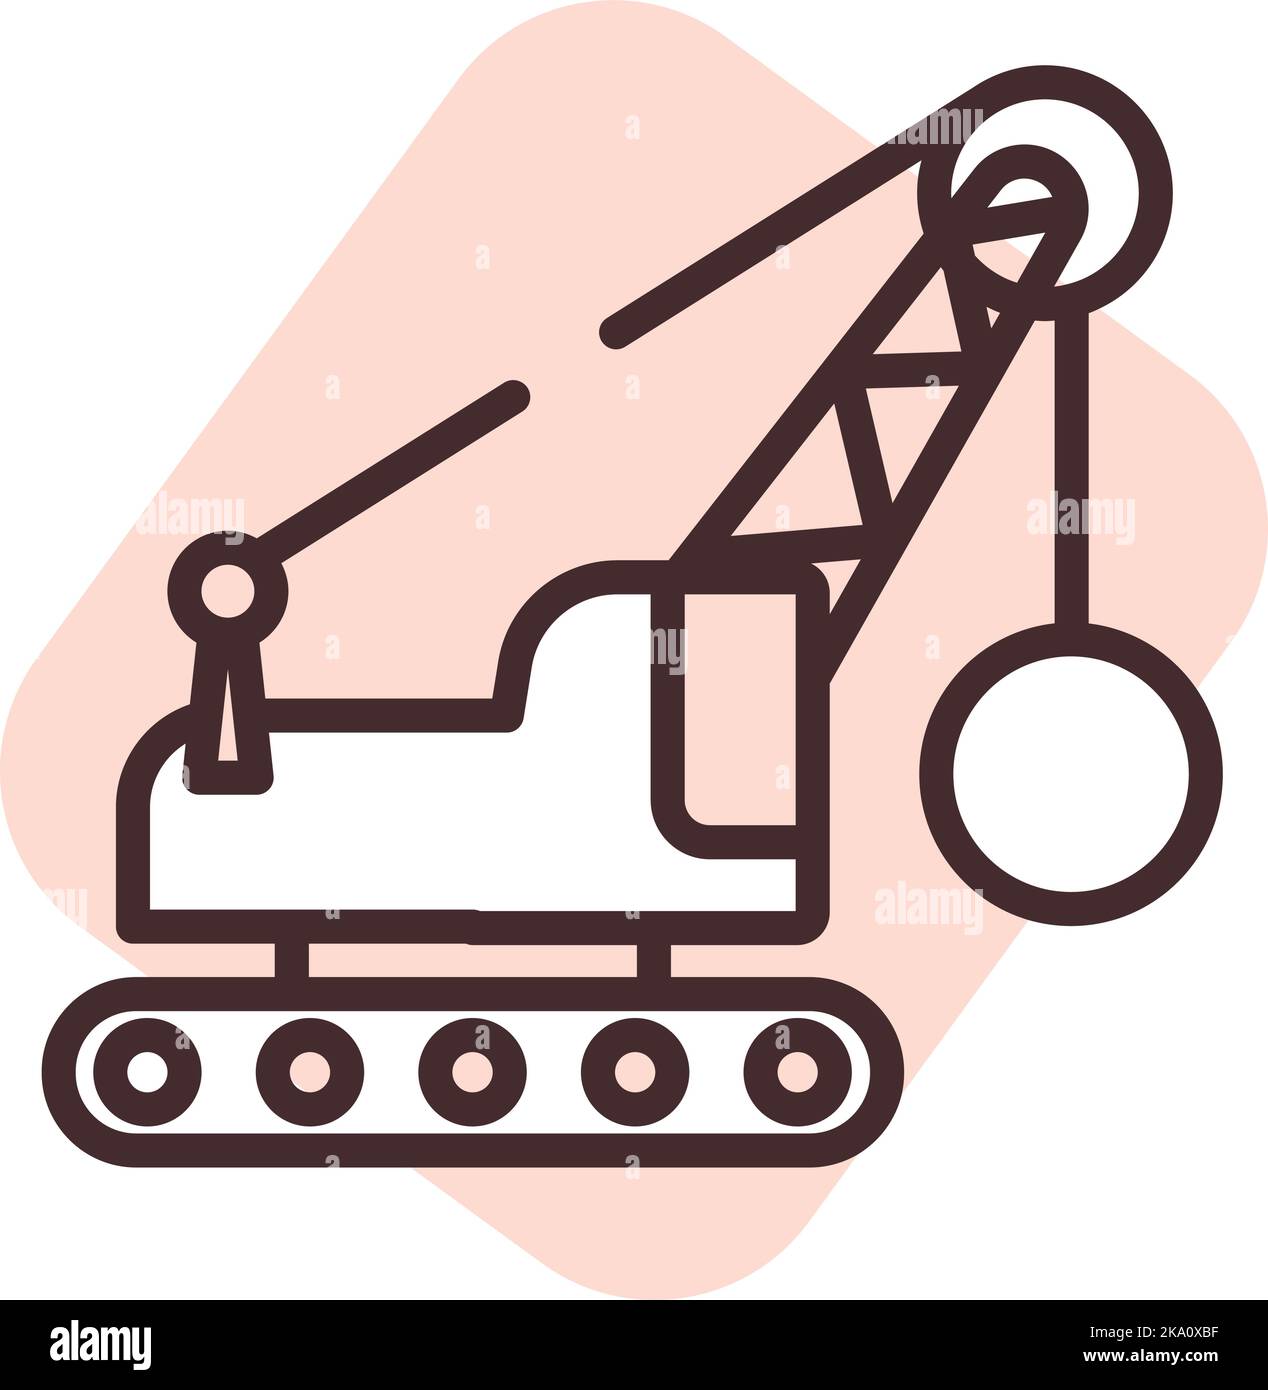 Construction wrecking ball crane, illustration or icon, vector on white background. Stock Vector